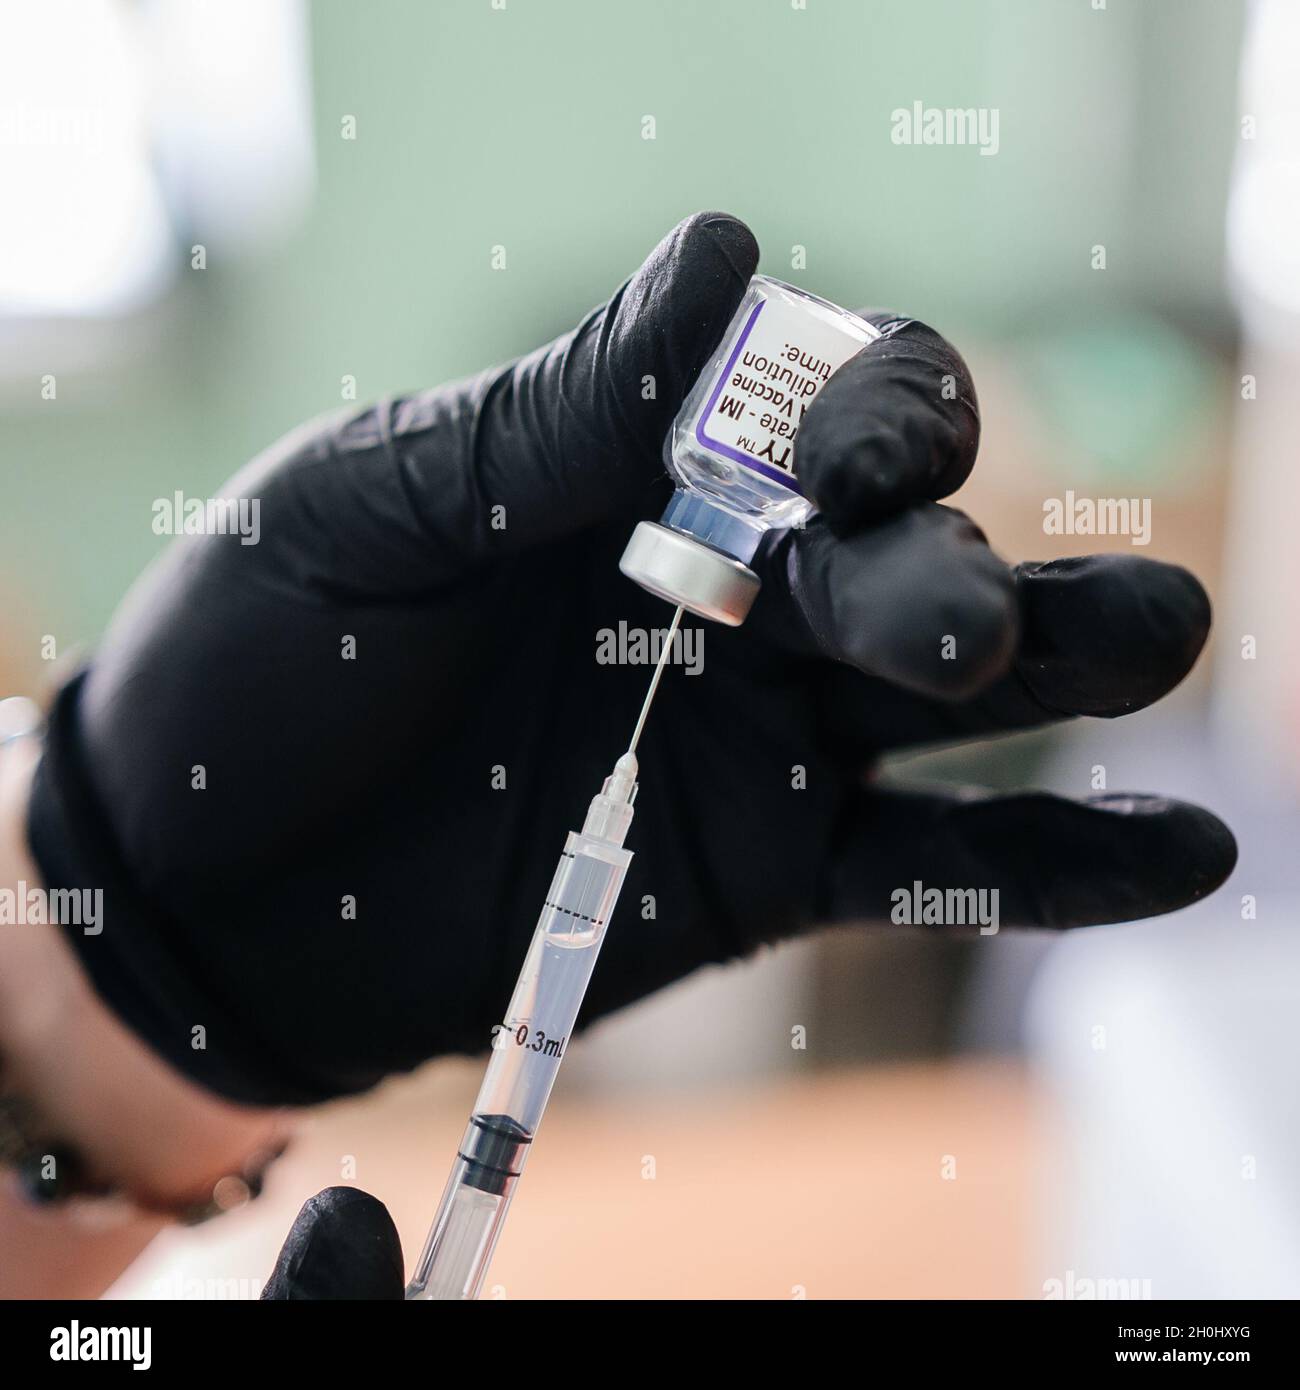 Kalush, Ukraine September 14, 2021: anti-viral vaccine pfizer in a vial against covid infection, vaccination in Ukraine. Stock Photo